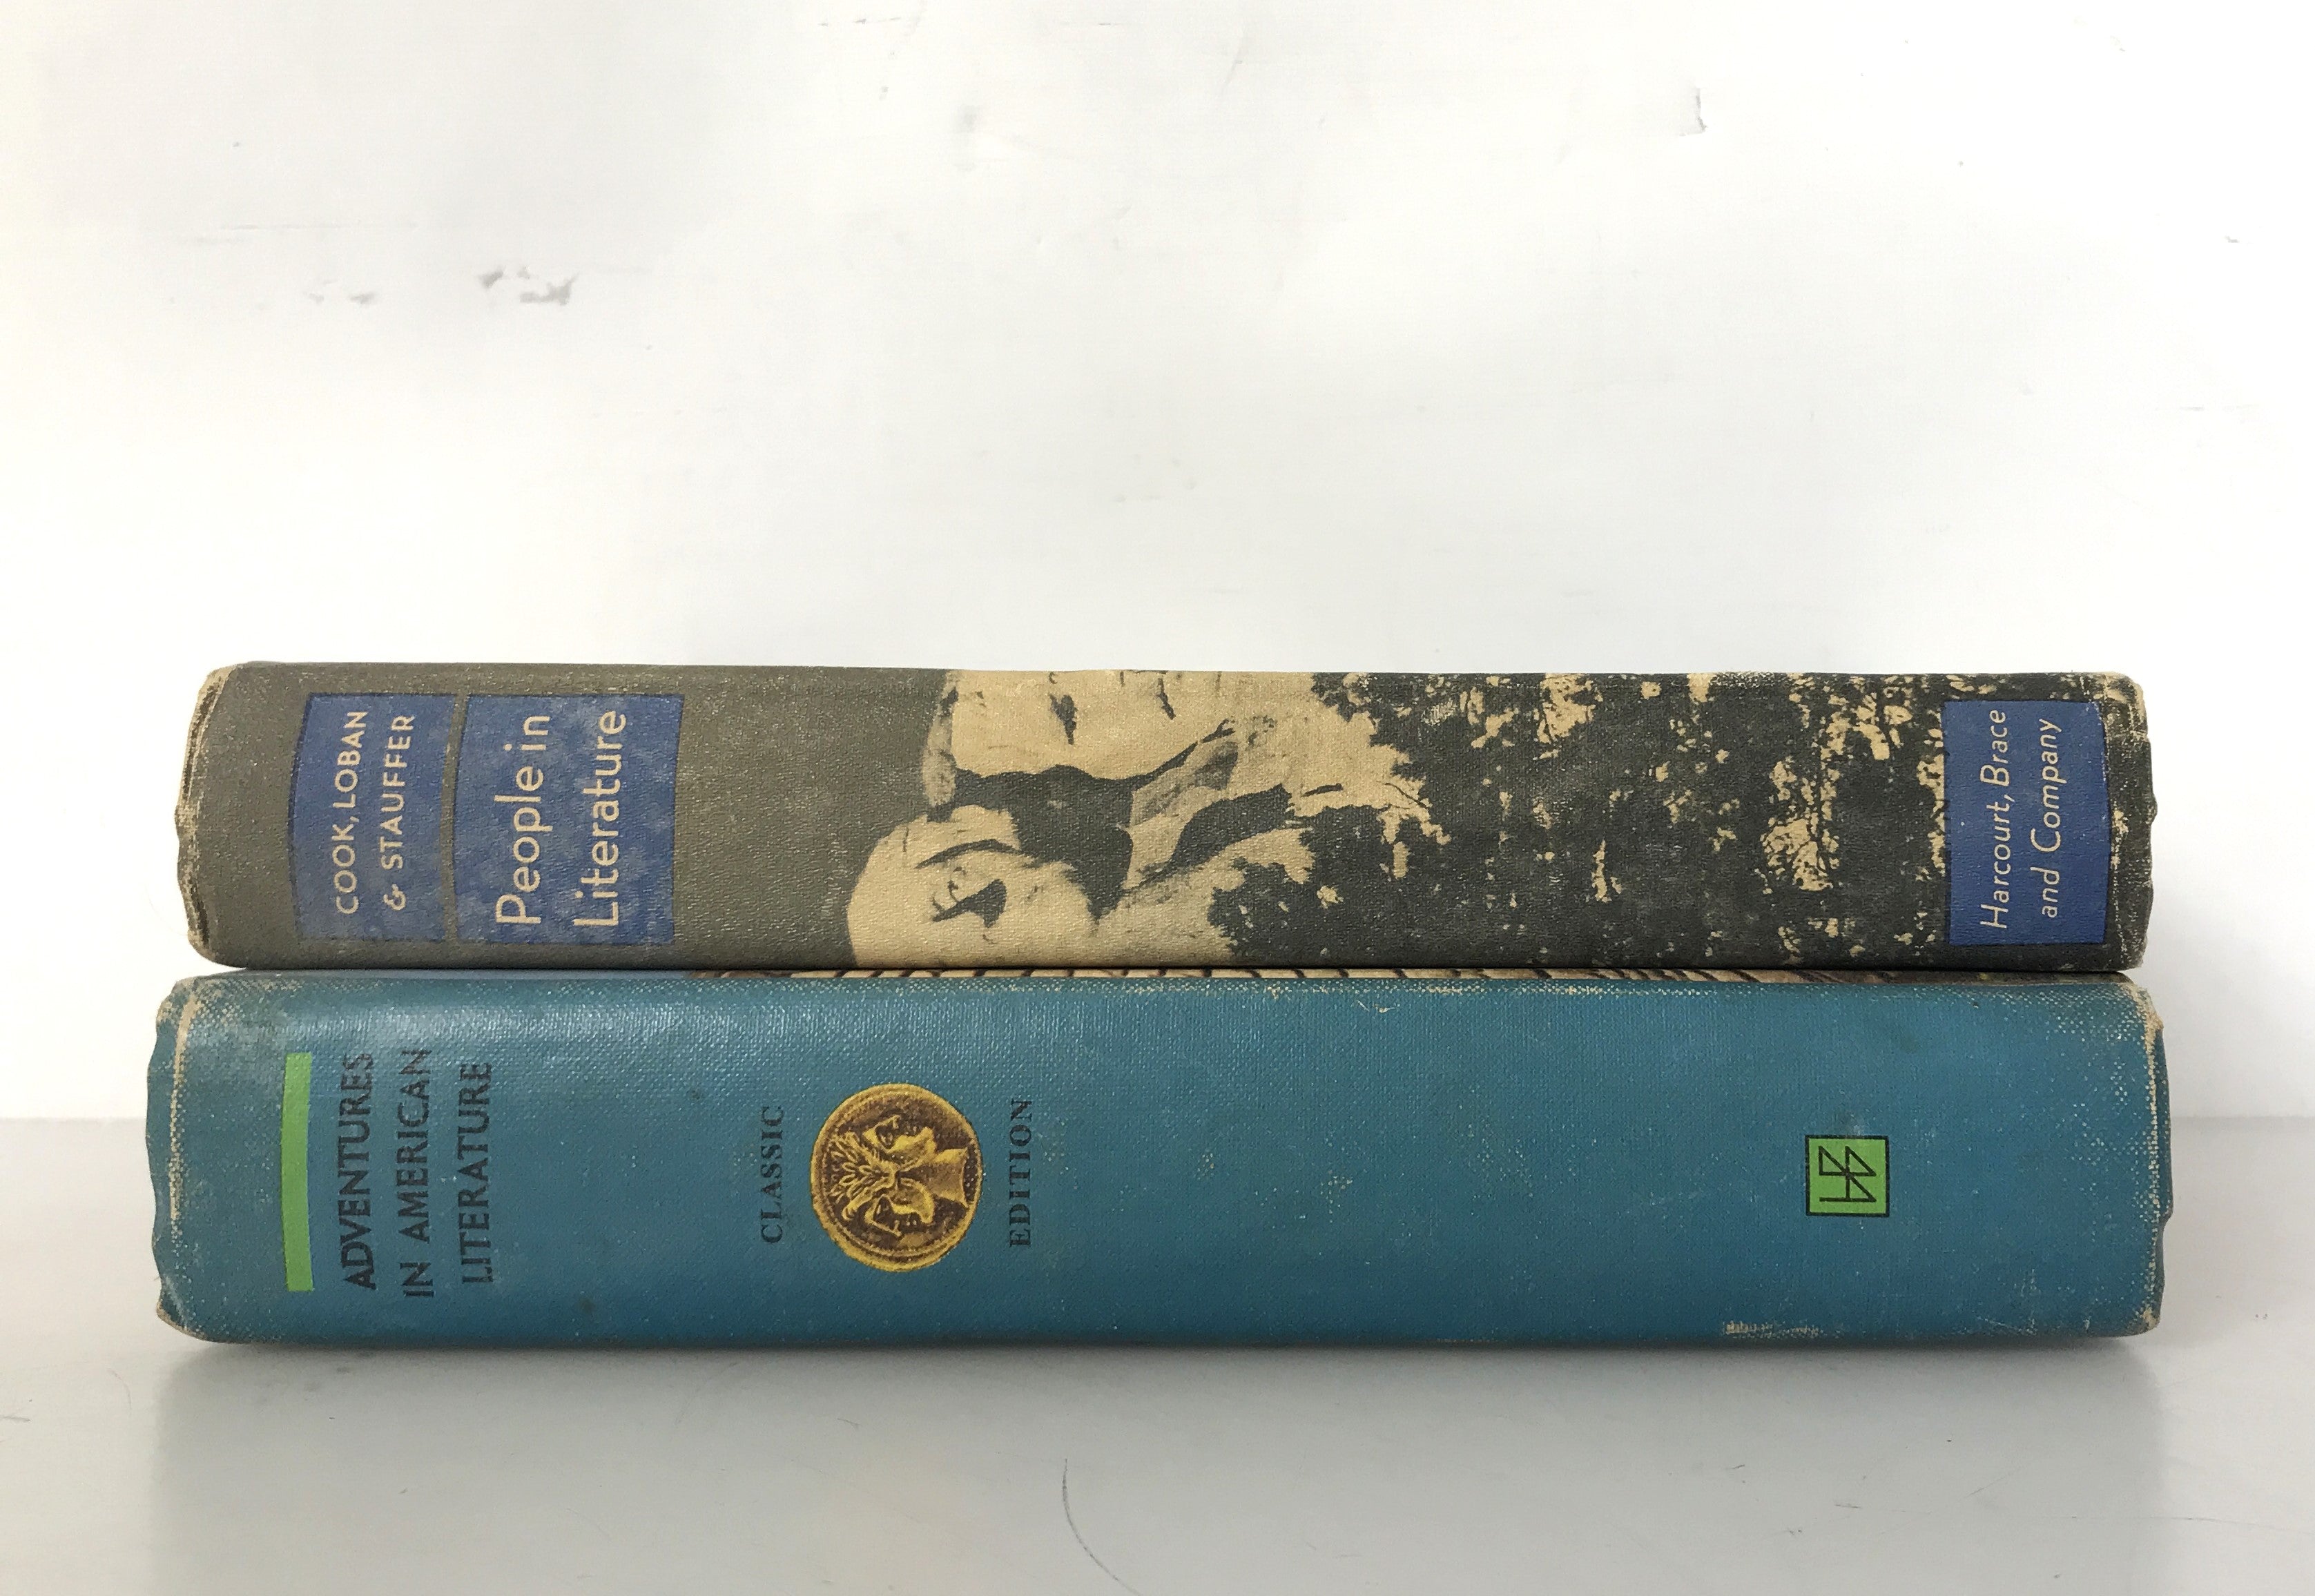 Lot of 2 Reading Textbooks People in Literature and Adventures in American Literature 1950, 1968 HC